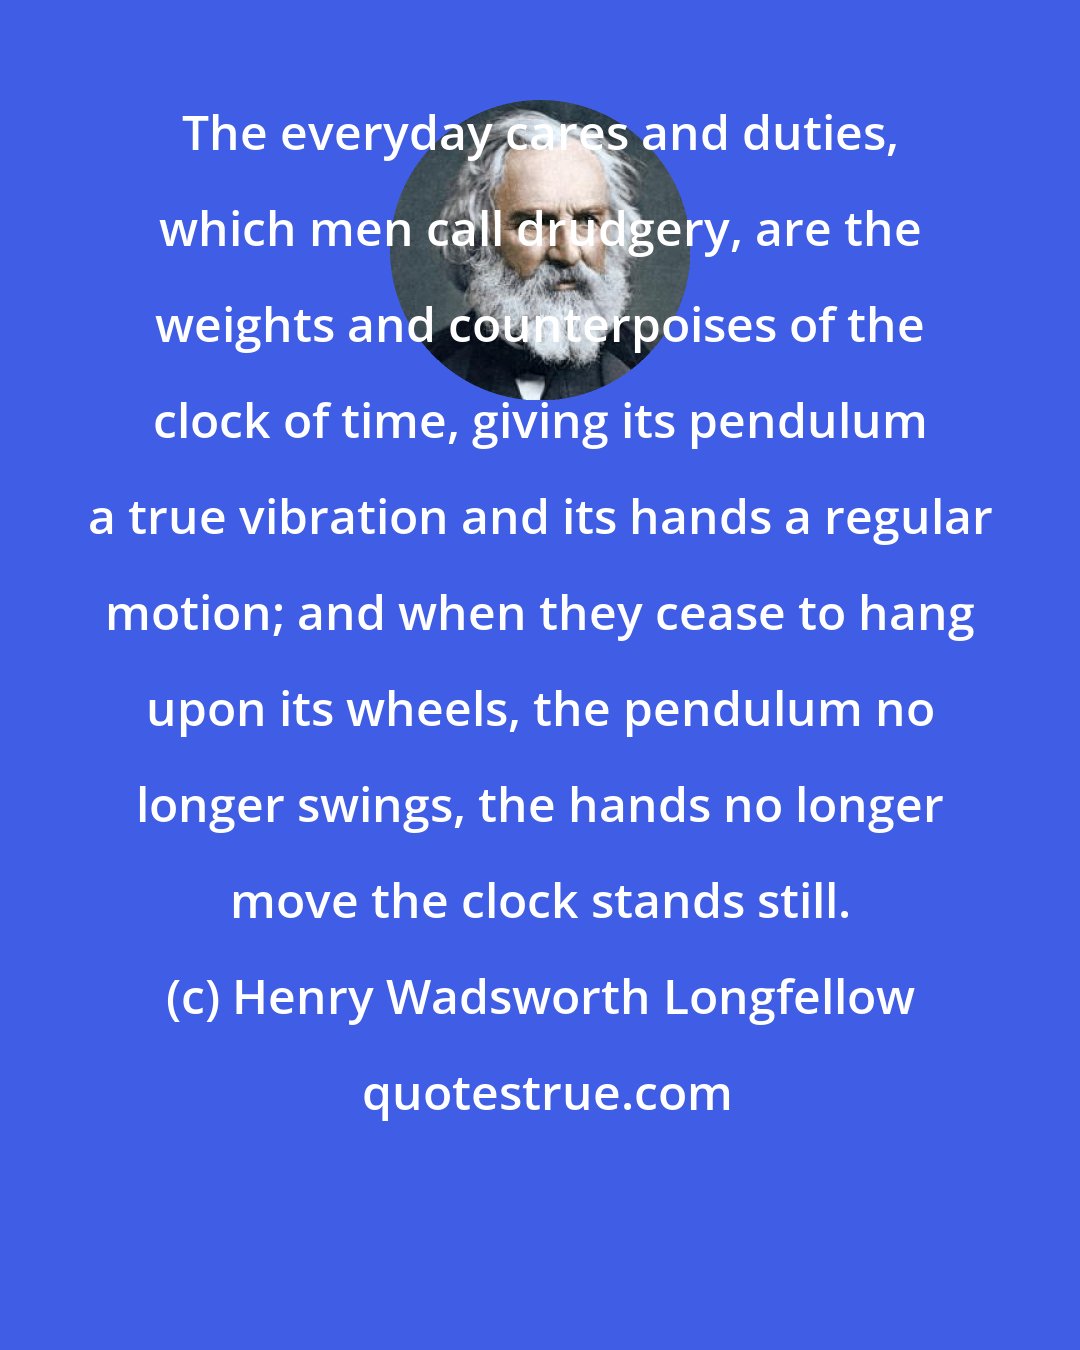 Henry Wadsworth Longfellow: The everyday cares and duties, which men call drudgery, are the weights and counterpoises of the clock of time, giving its pendulum a true vibration and its hands a regular motion; and when they cease to hang upon its wheels, the pendulum no longer swings, the hands no longer move the clock stands still.